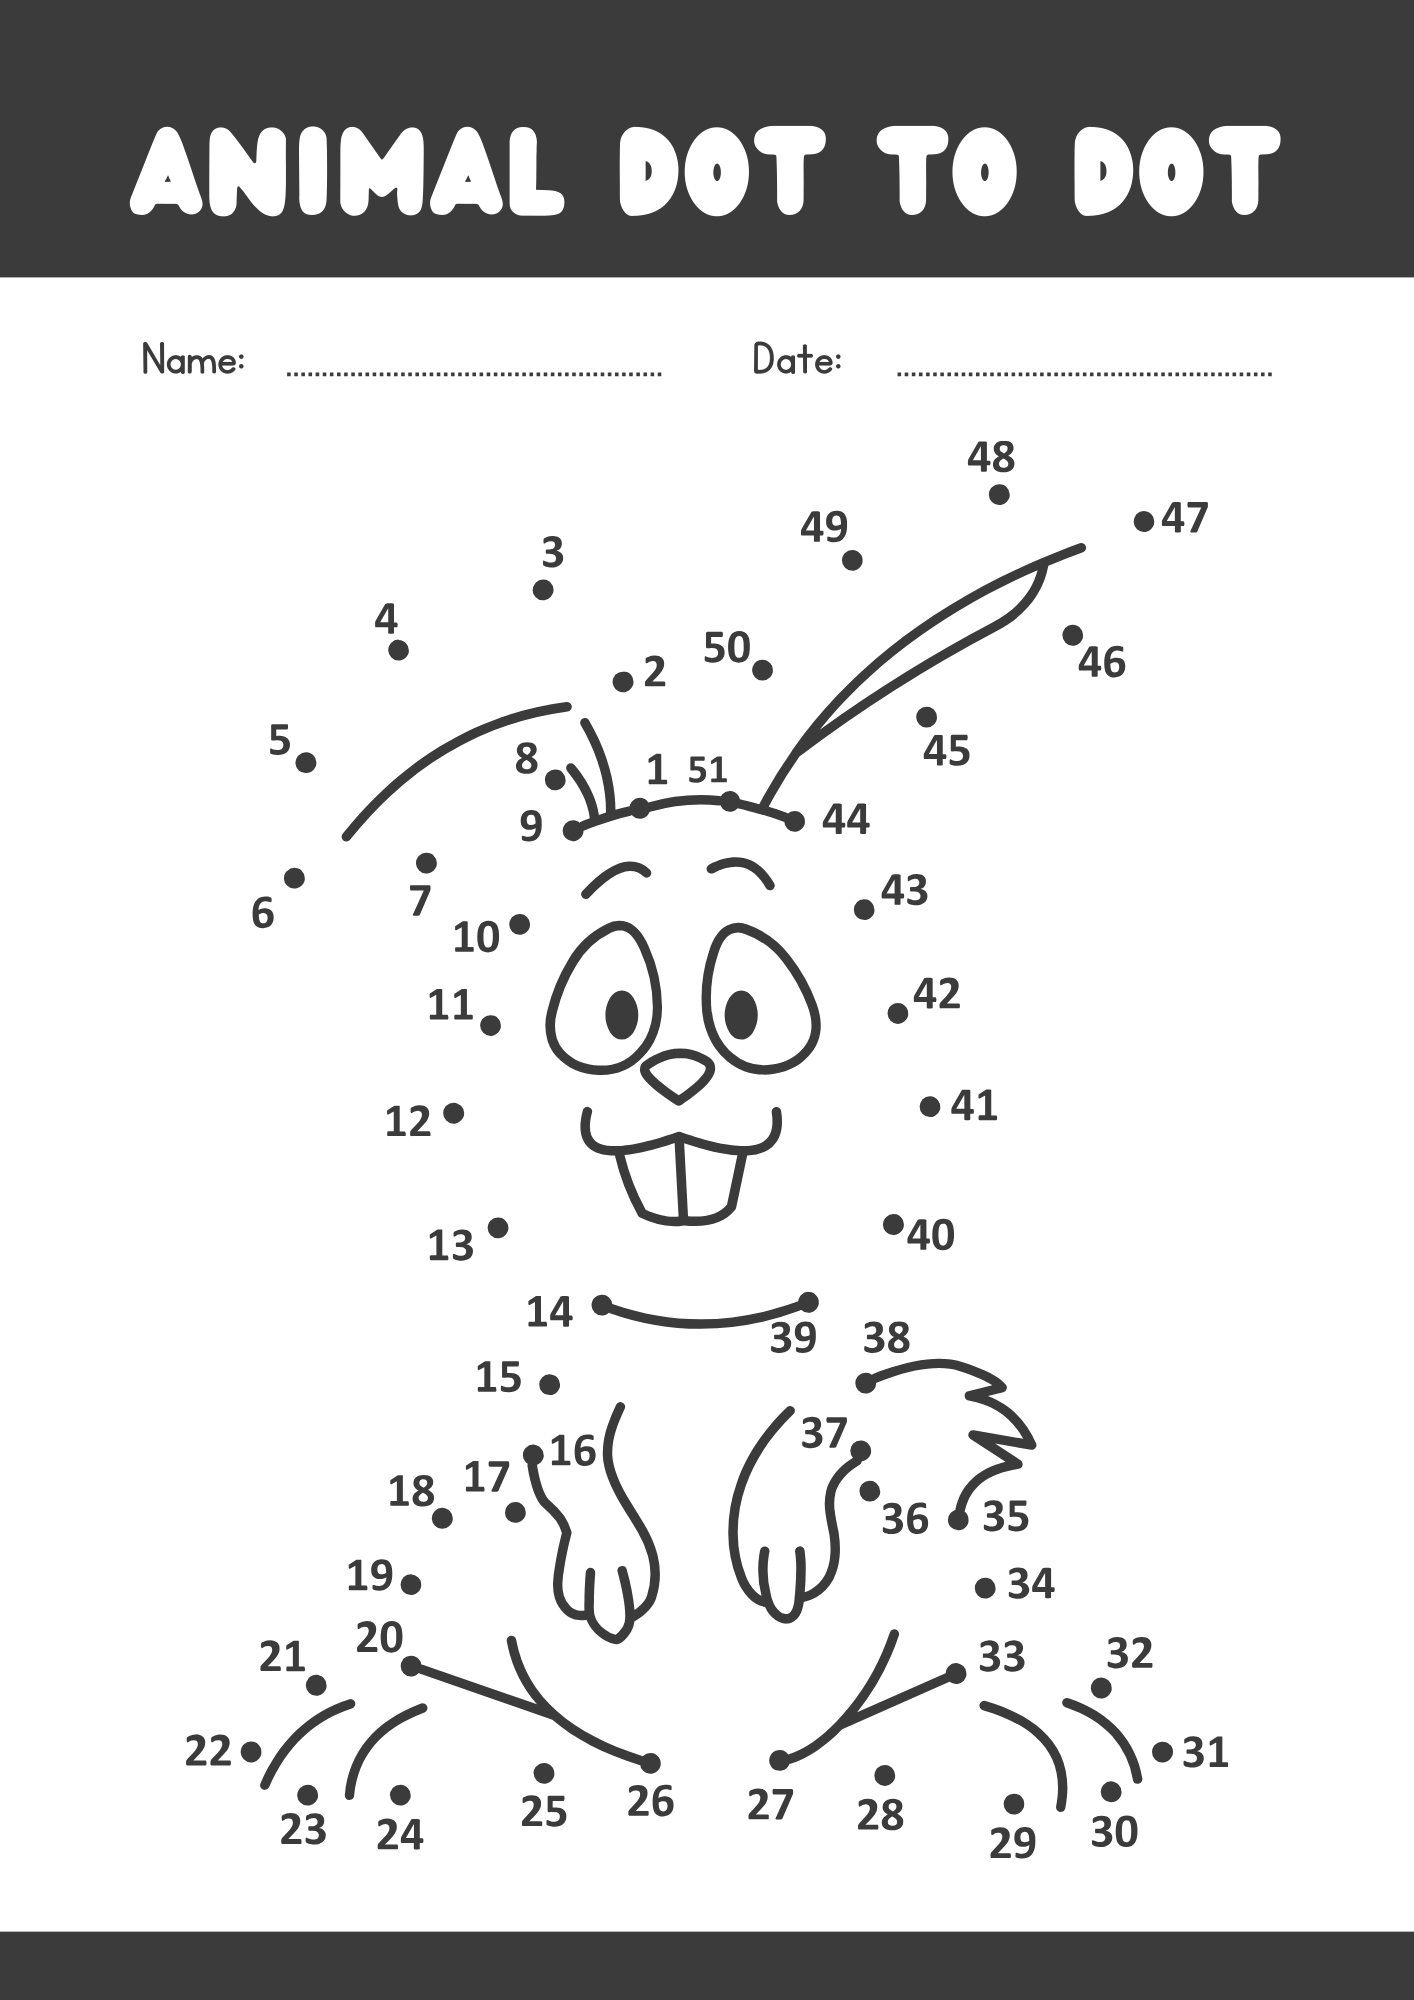 Free Easter Holiday Activity Book